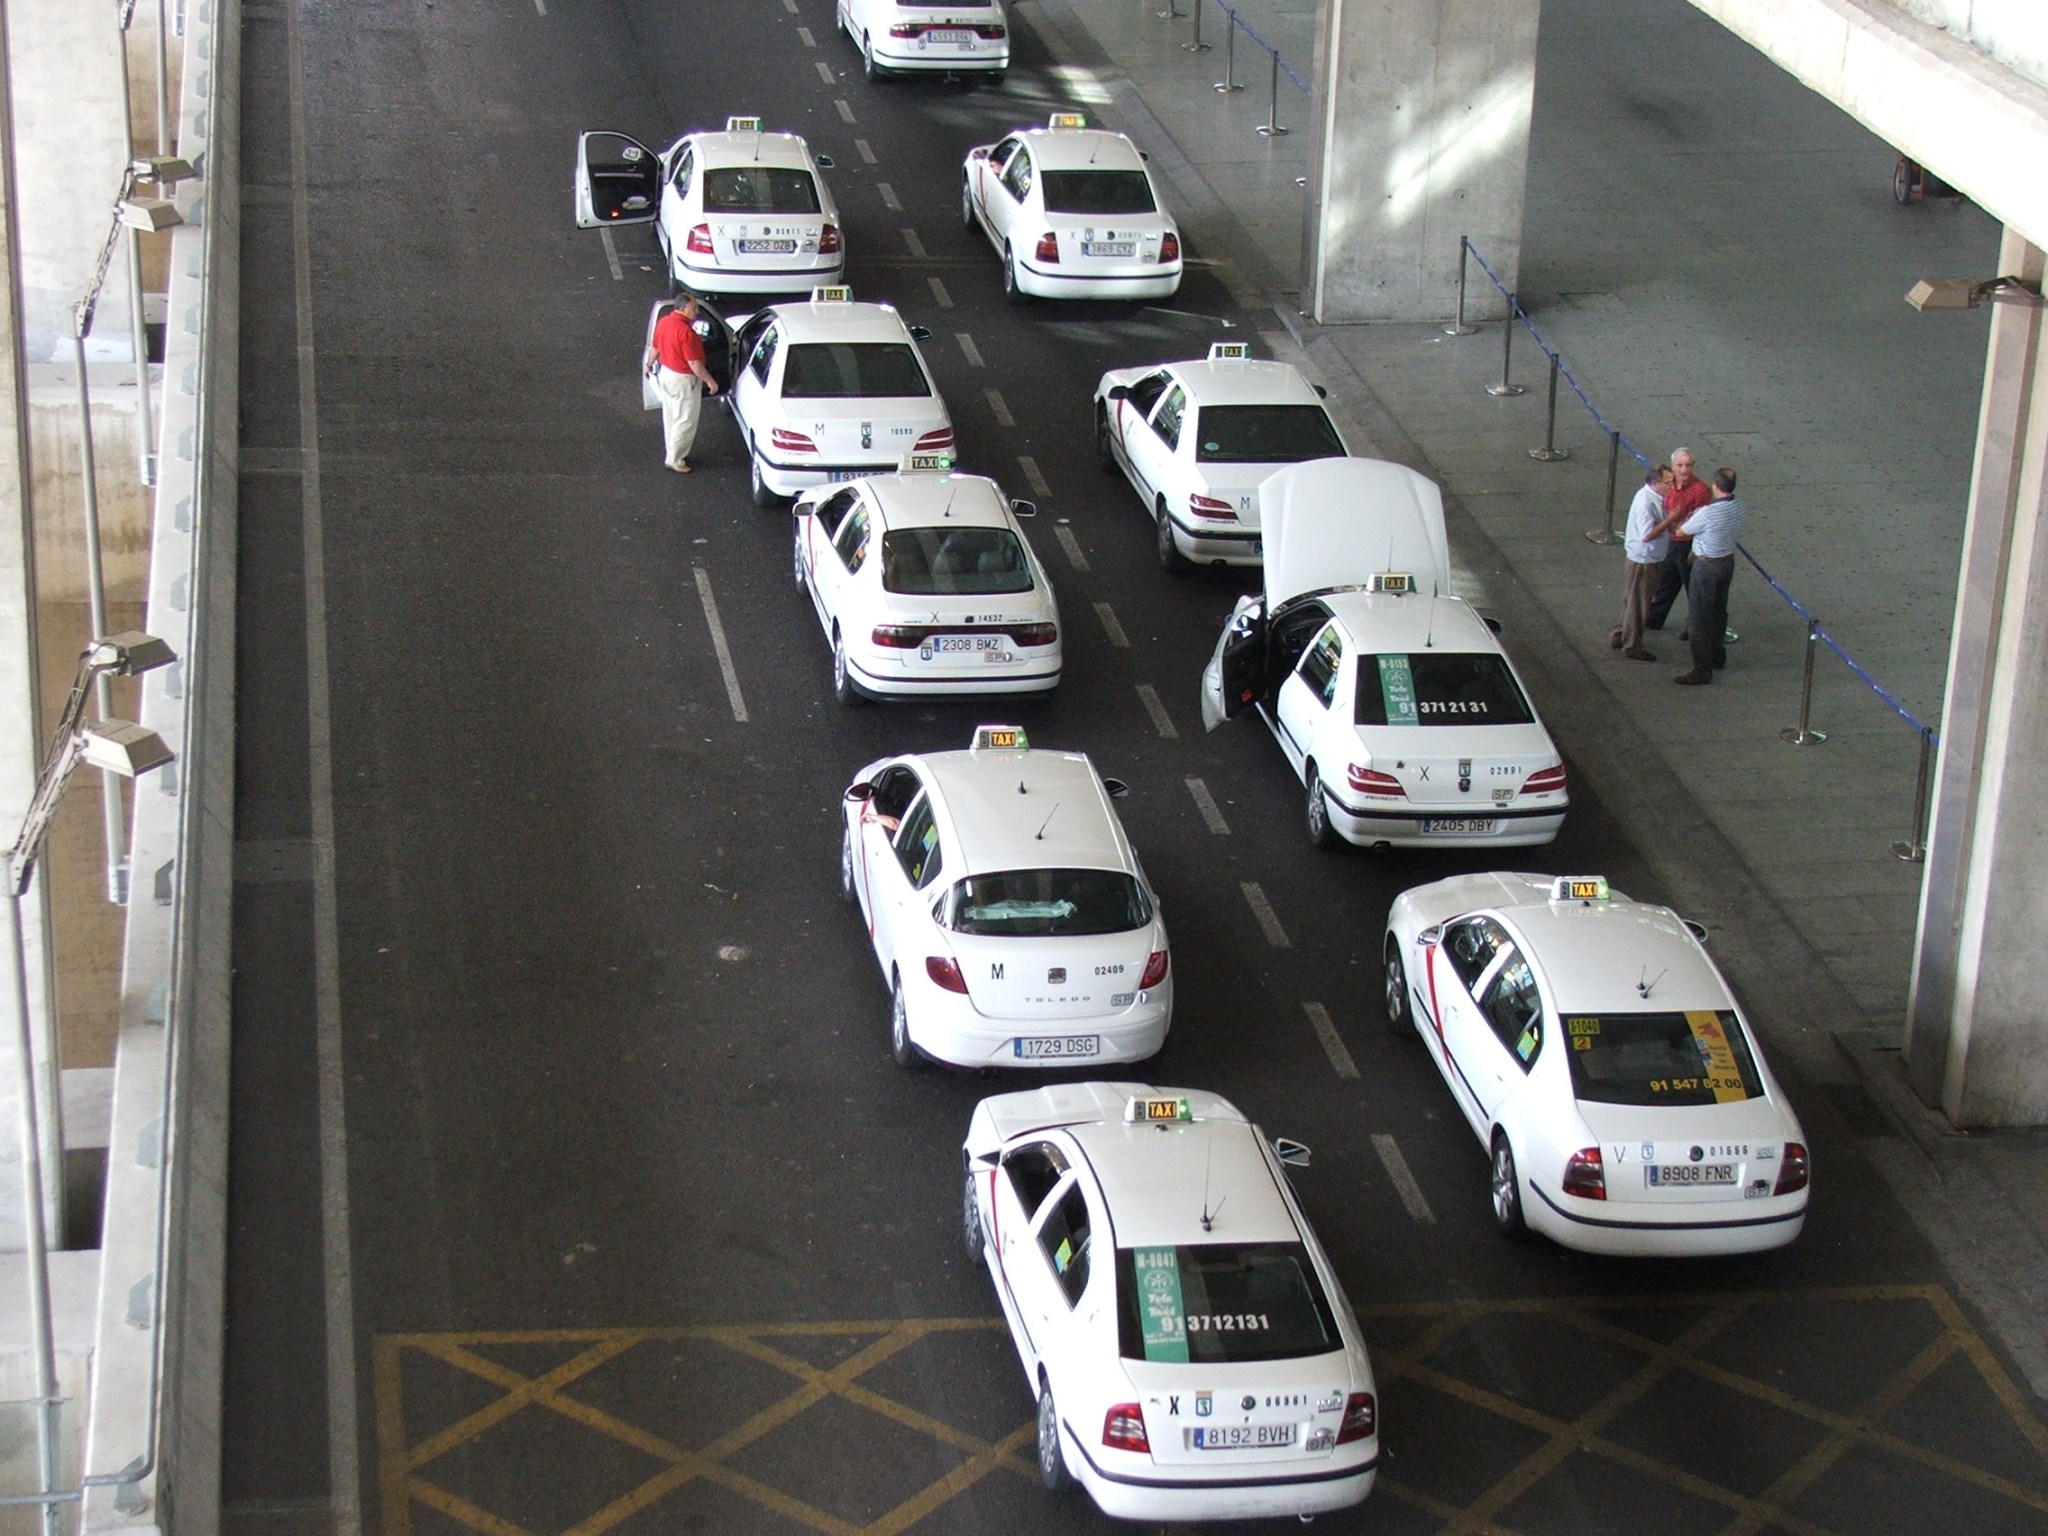 Taxis_in_Barajas_Madrid_2278